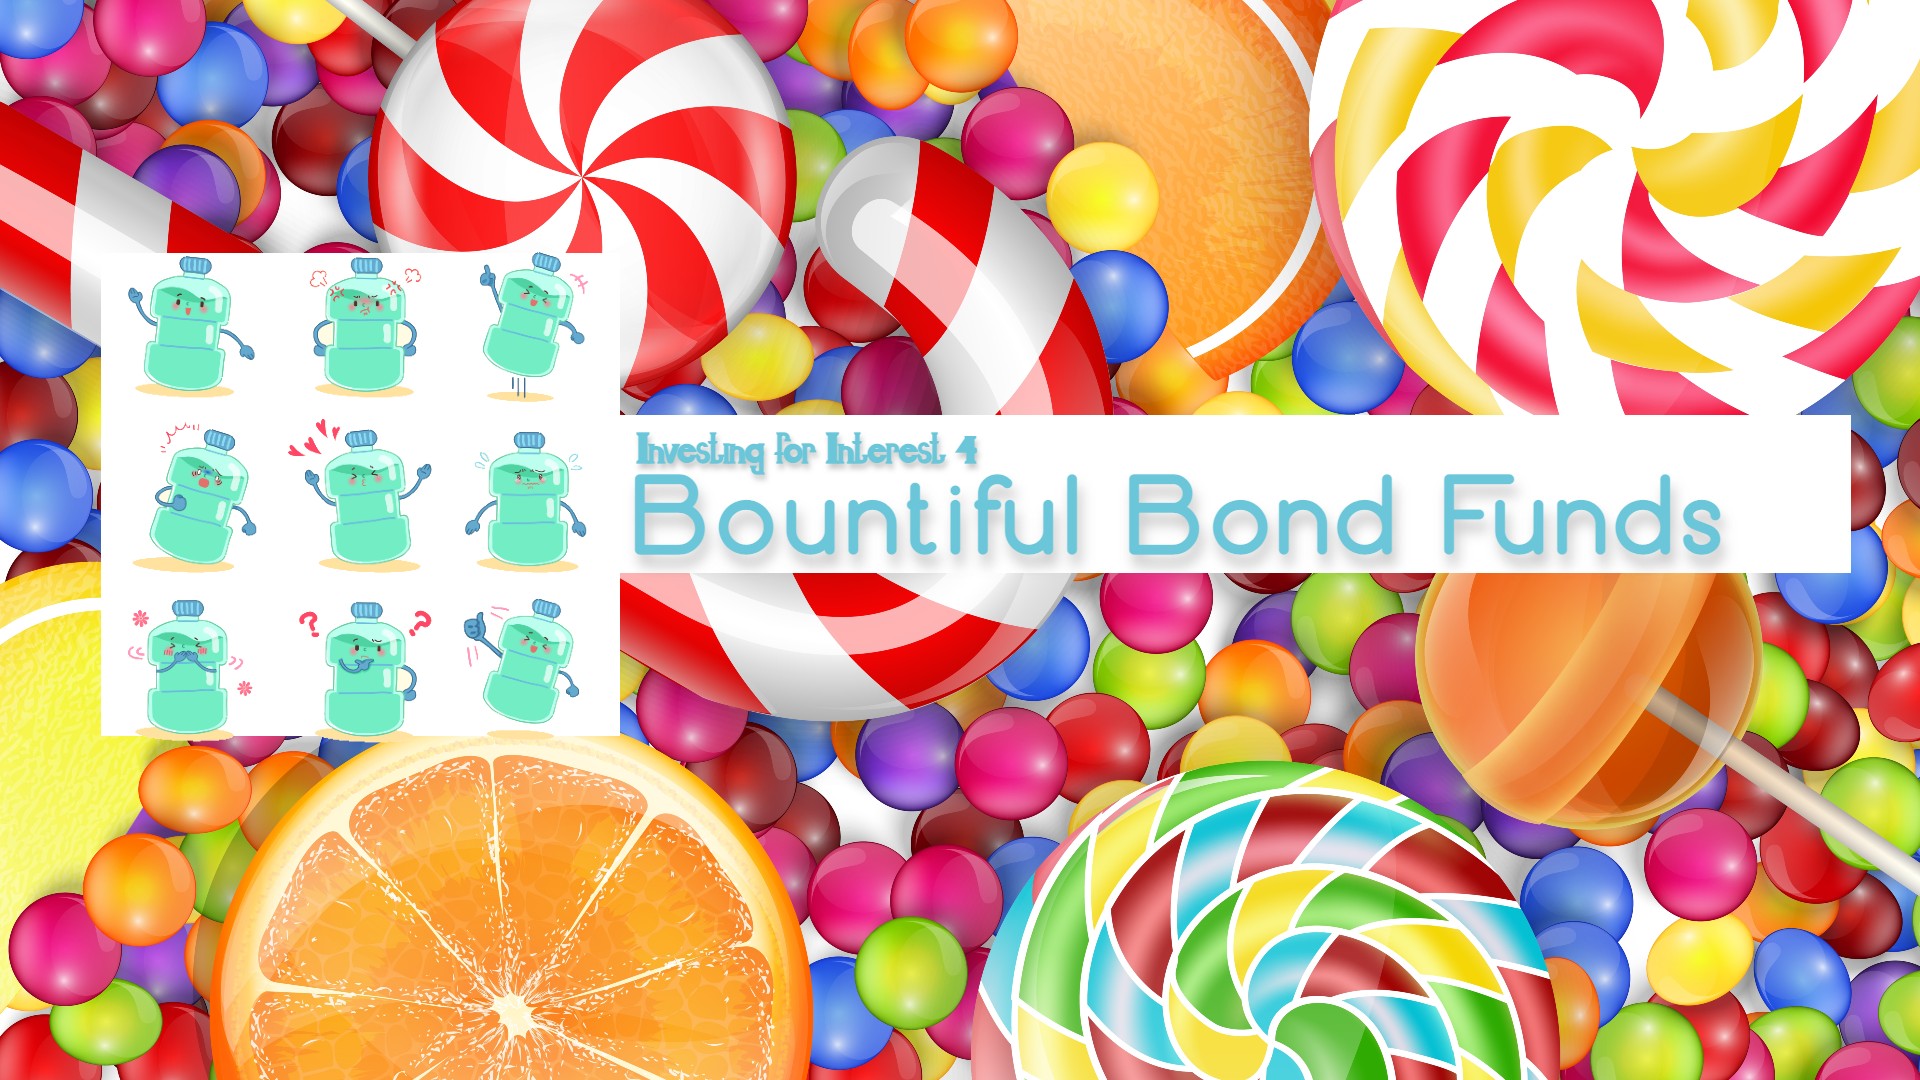 Investing for Interest 104: Bountiful Bond Funds